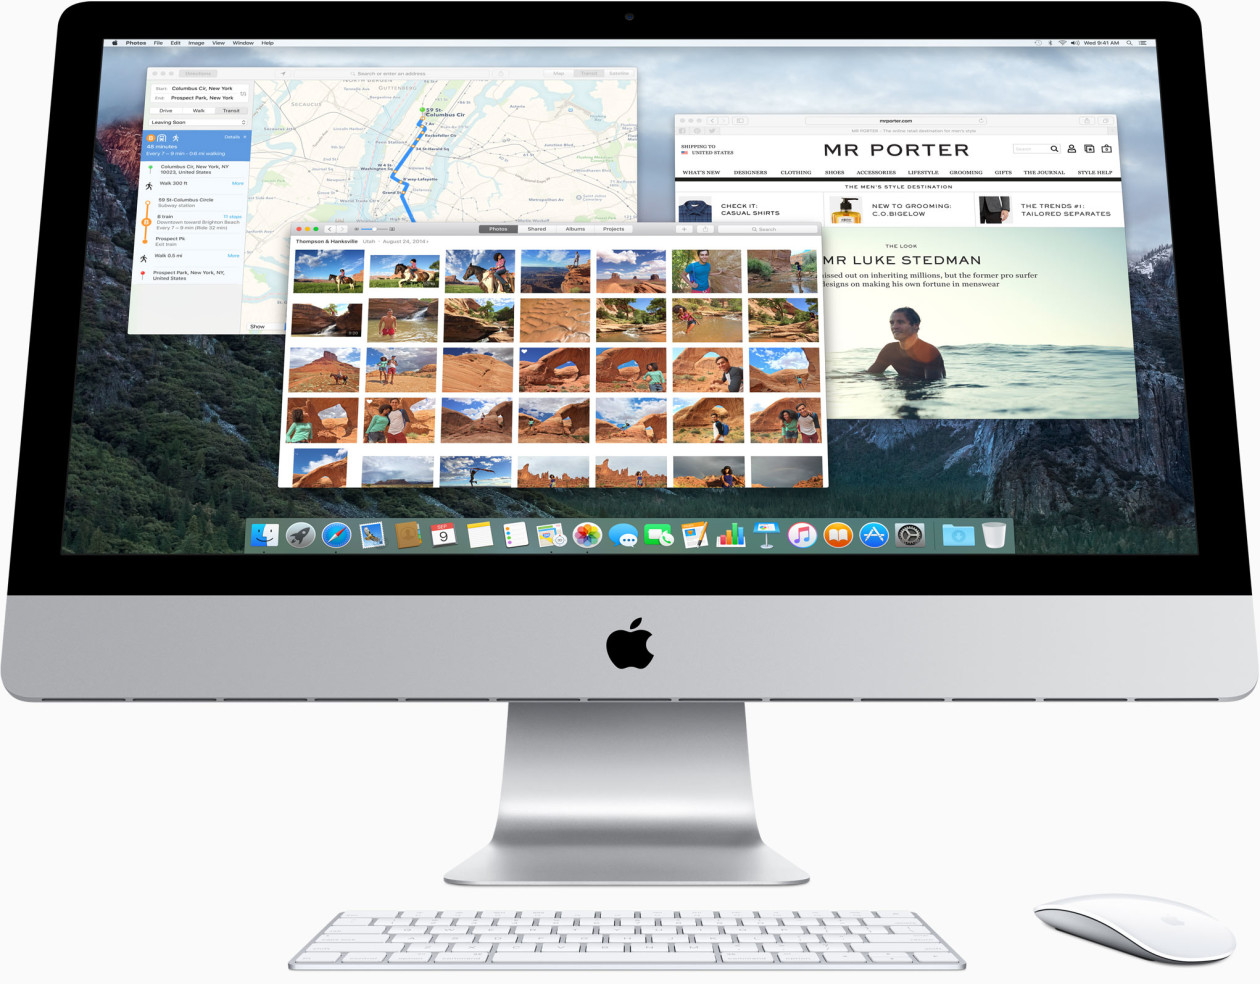 Rumor: New iMac will be released in October, accompanied by a new keyboard [atualizado]